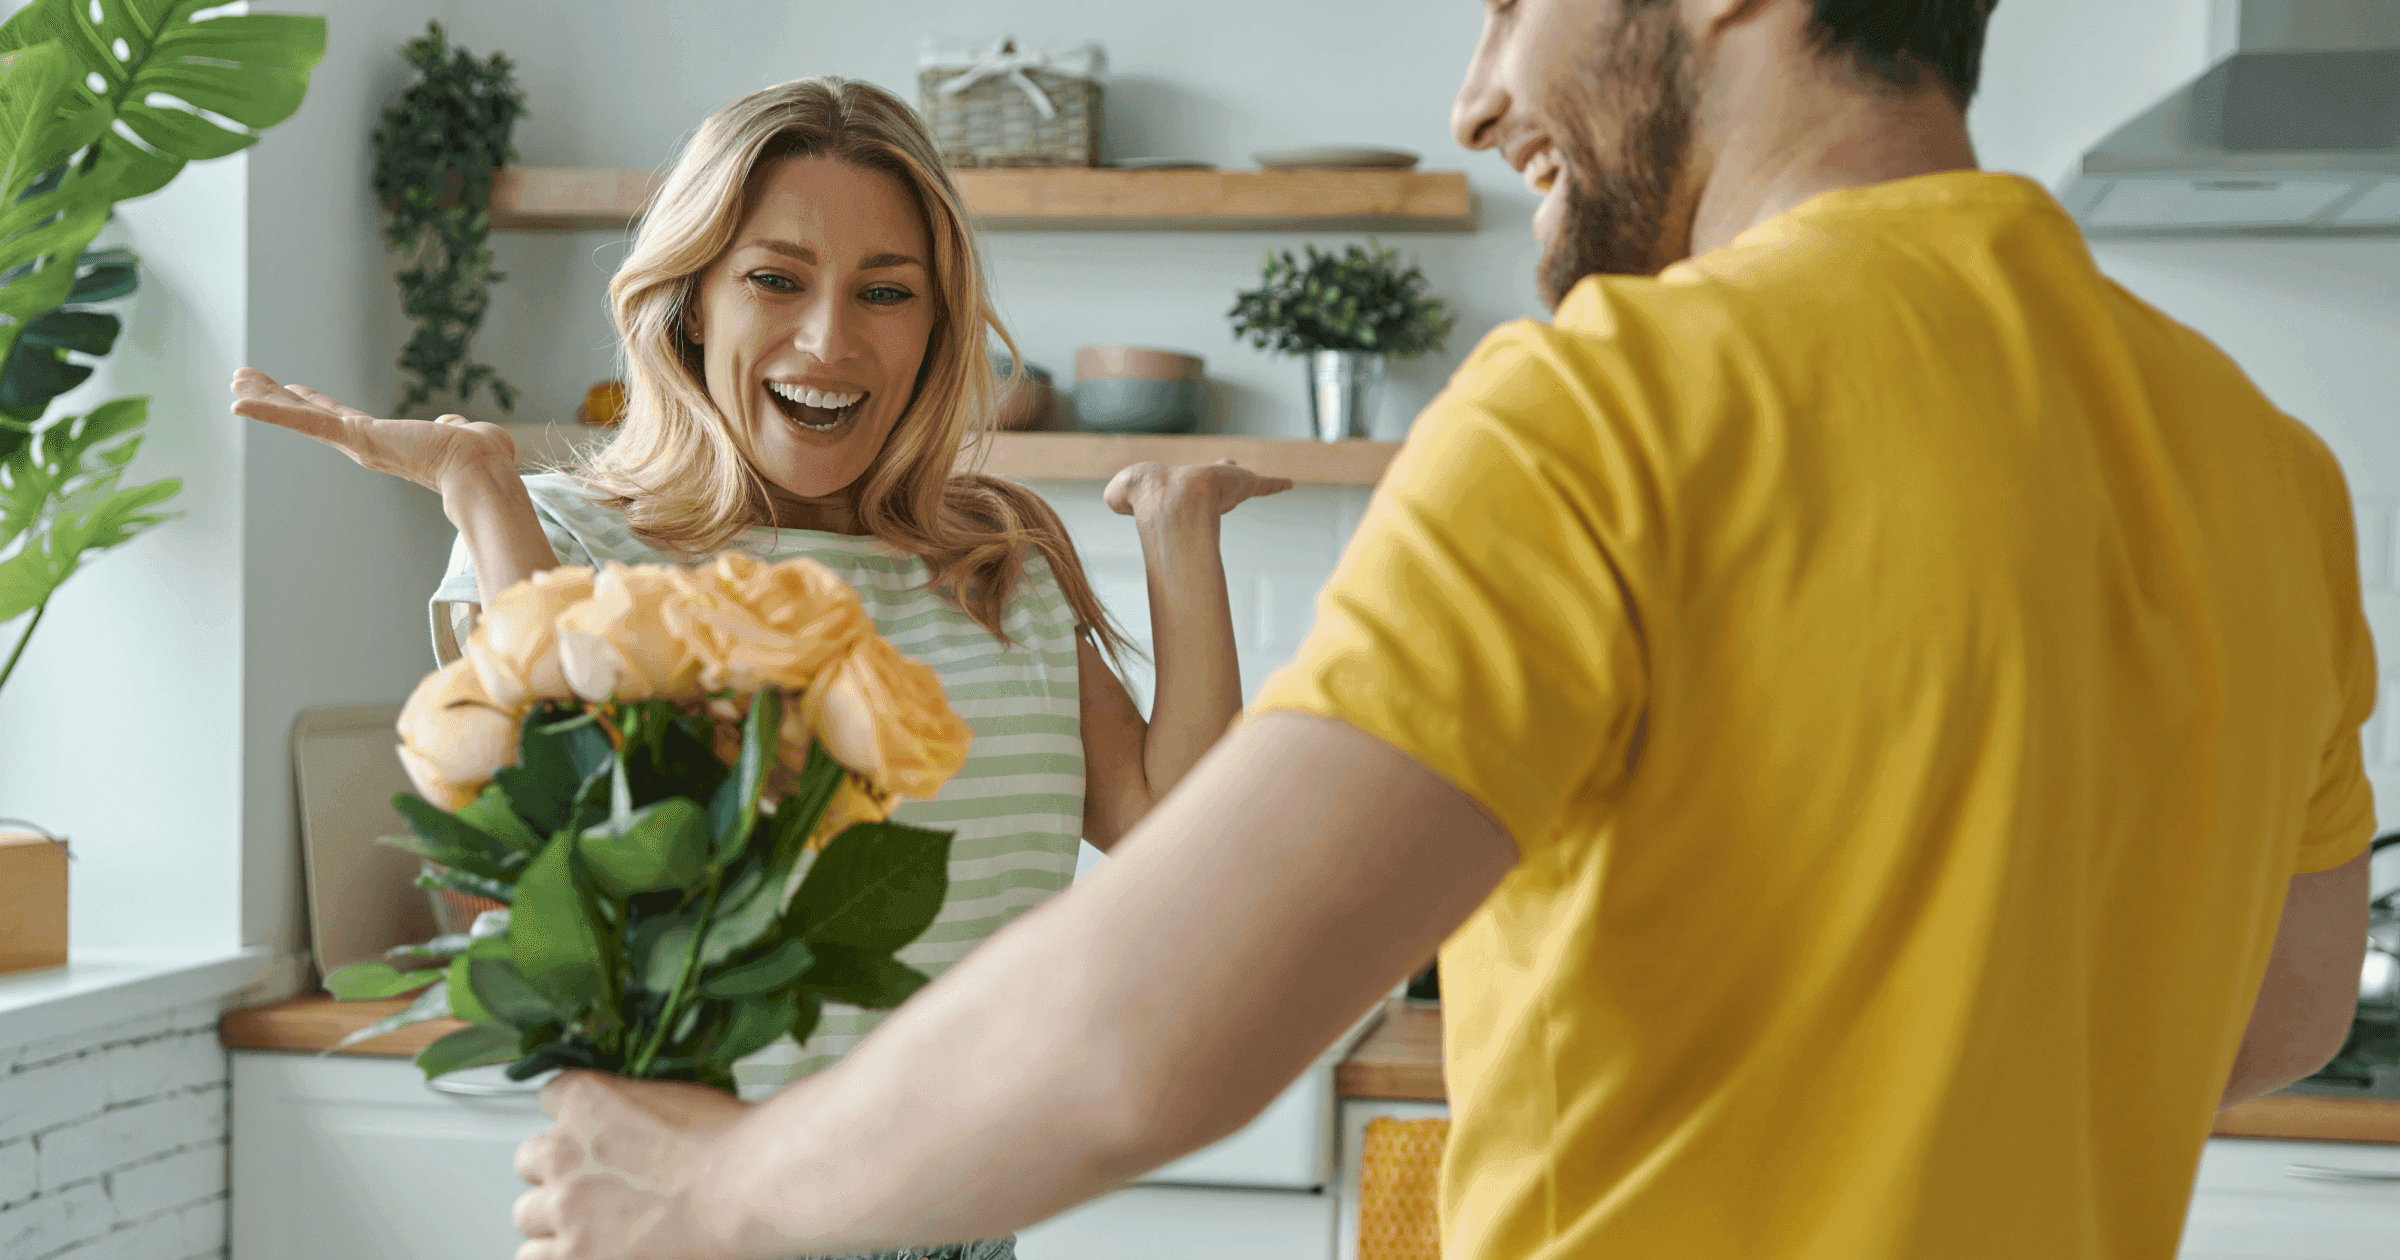 How to celebrate Valentine's Day when you're away from each other